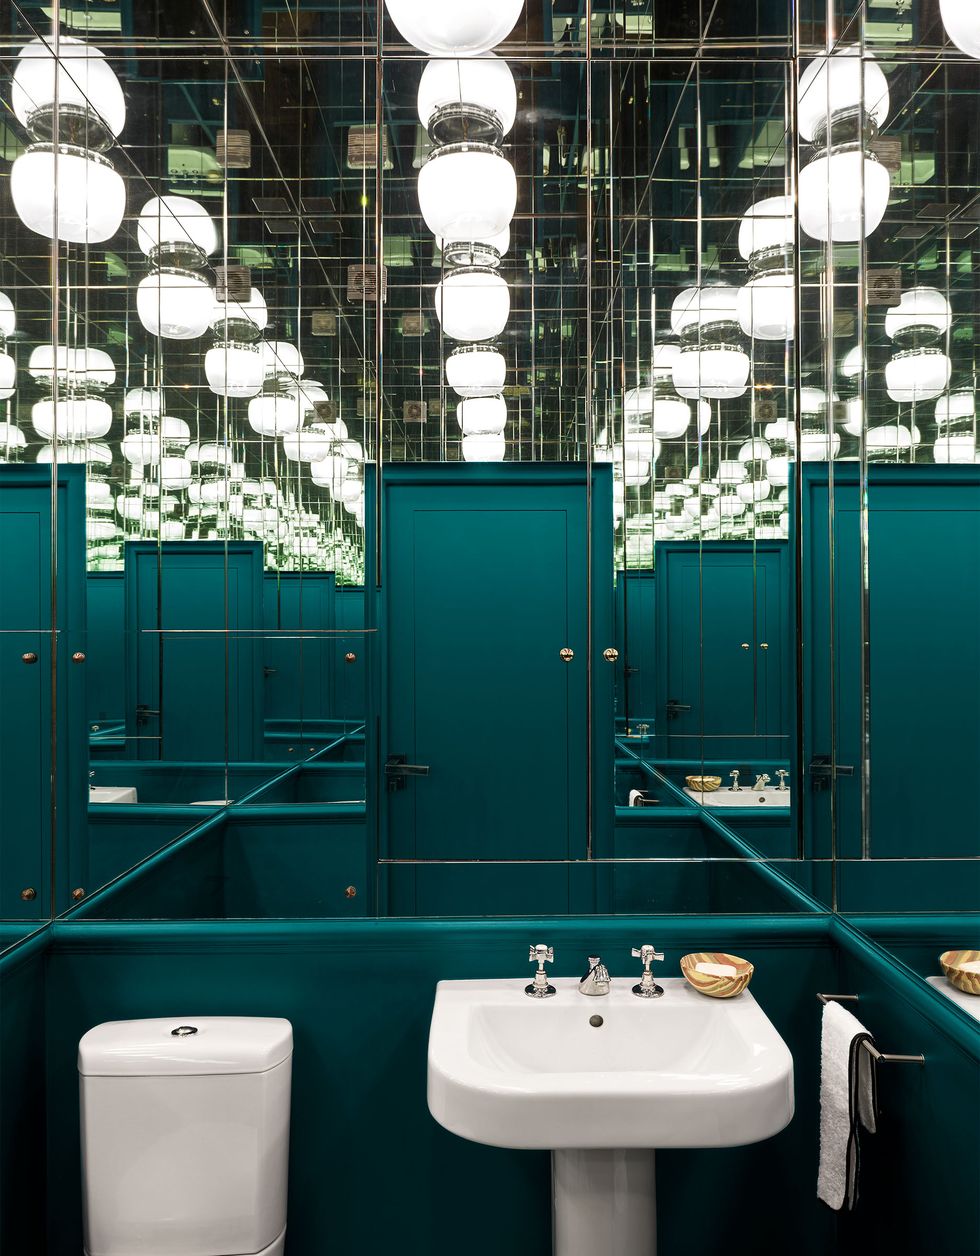 a bathroom has white porcelain fixtures and walls that are painted a deep teal, a mirror on one wall and mirrors on the ceiling reflect multiple images of the room and of the vintage opal glass ceiling light